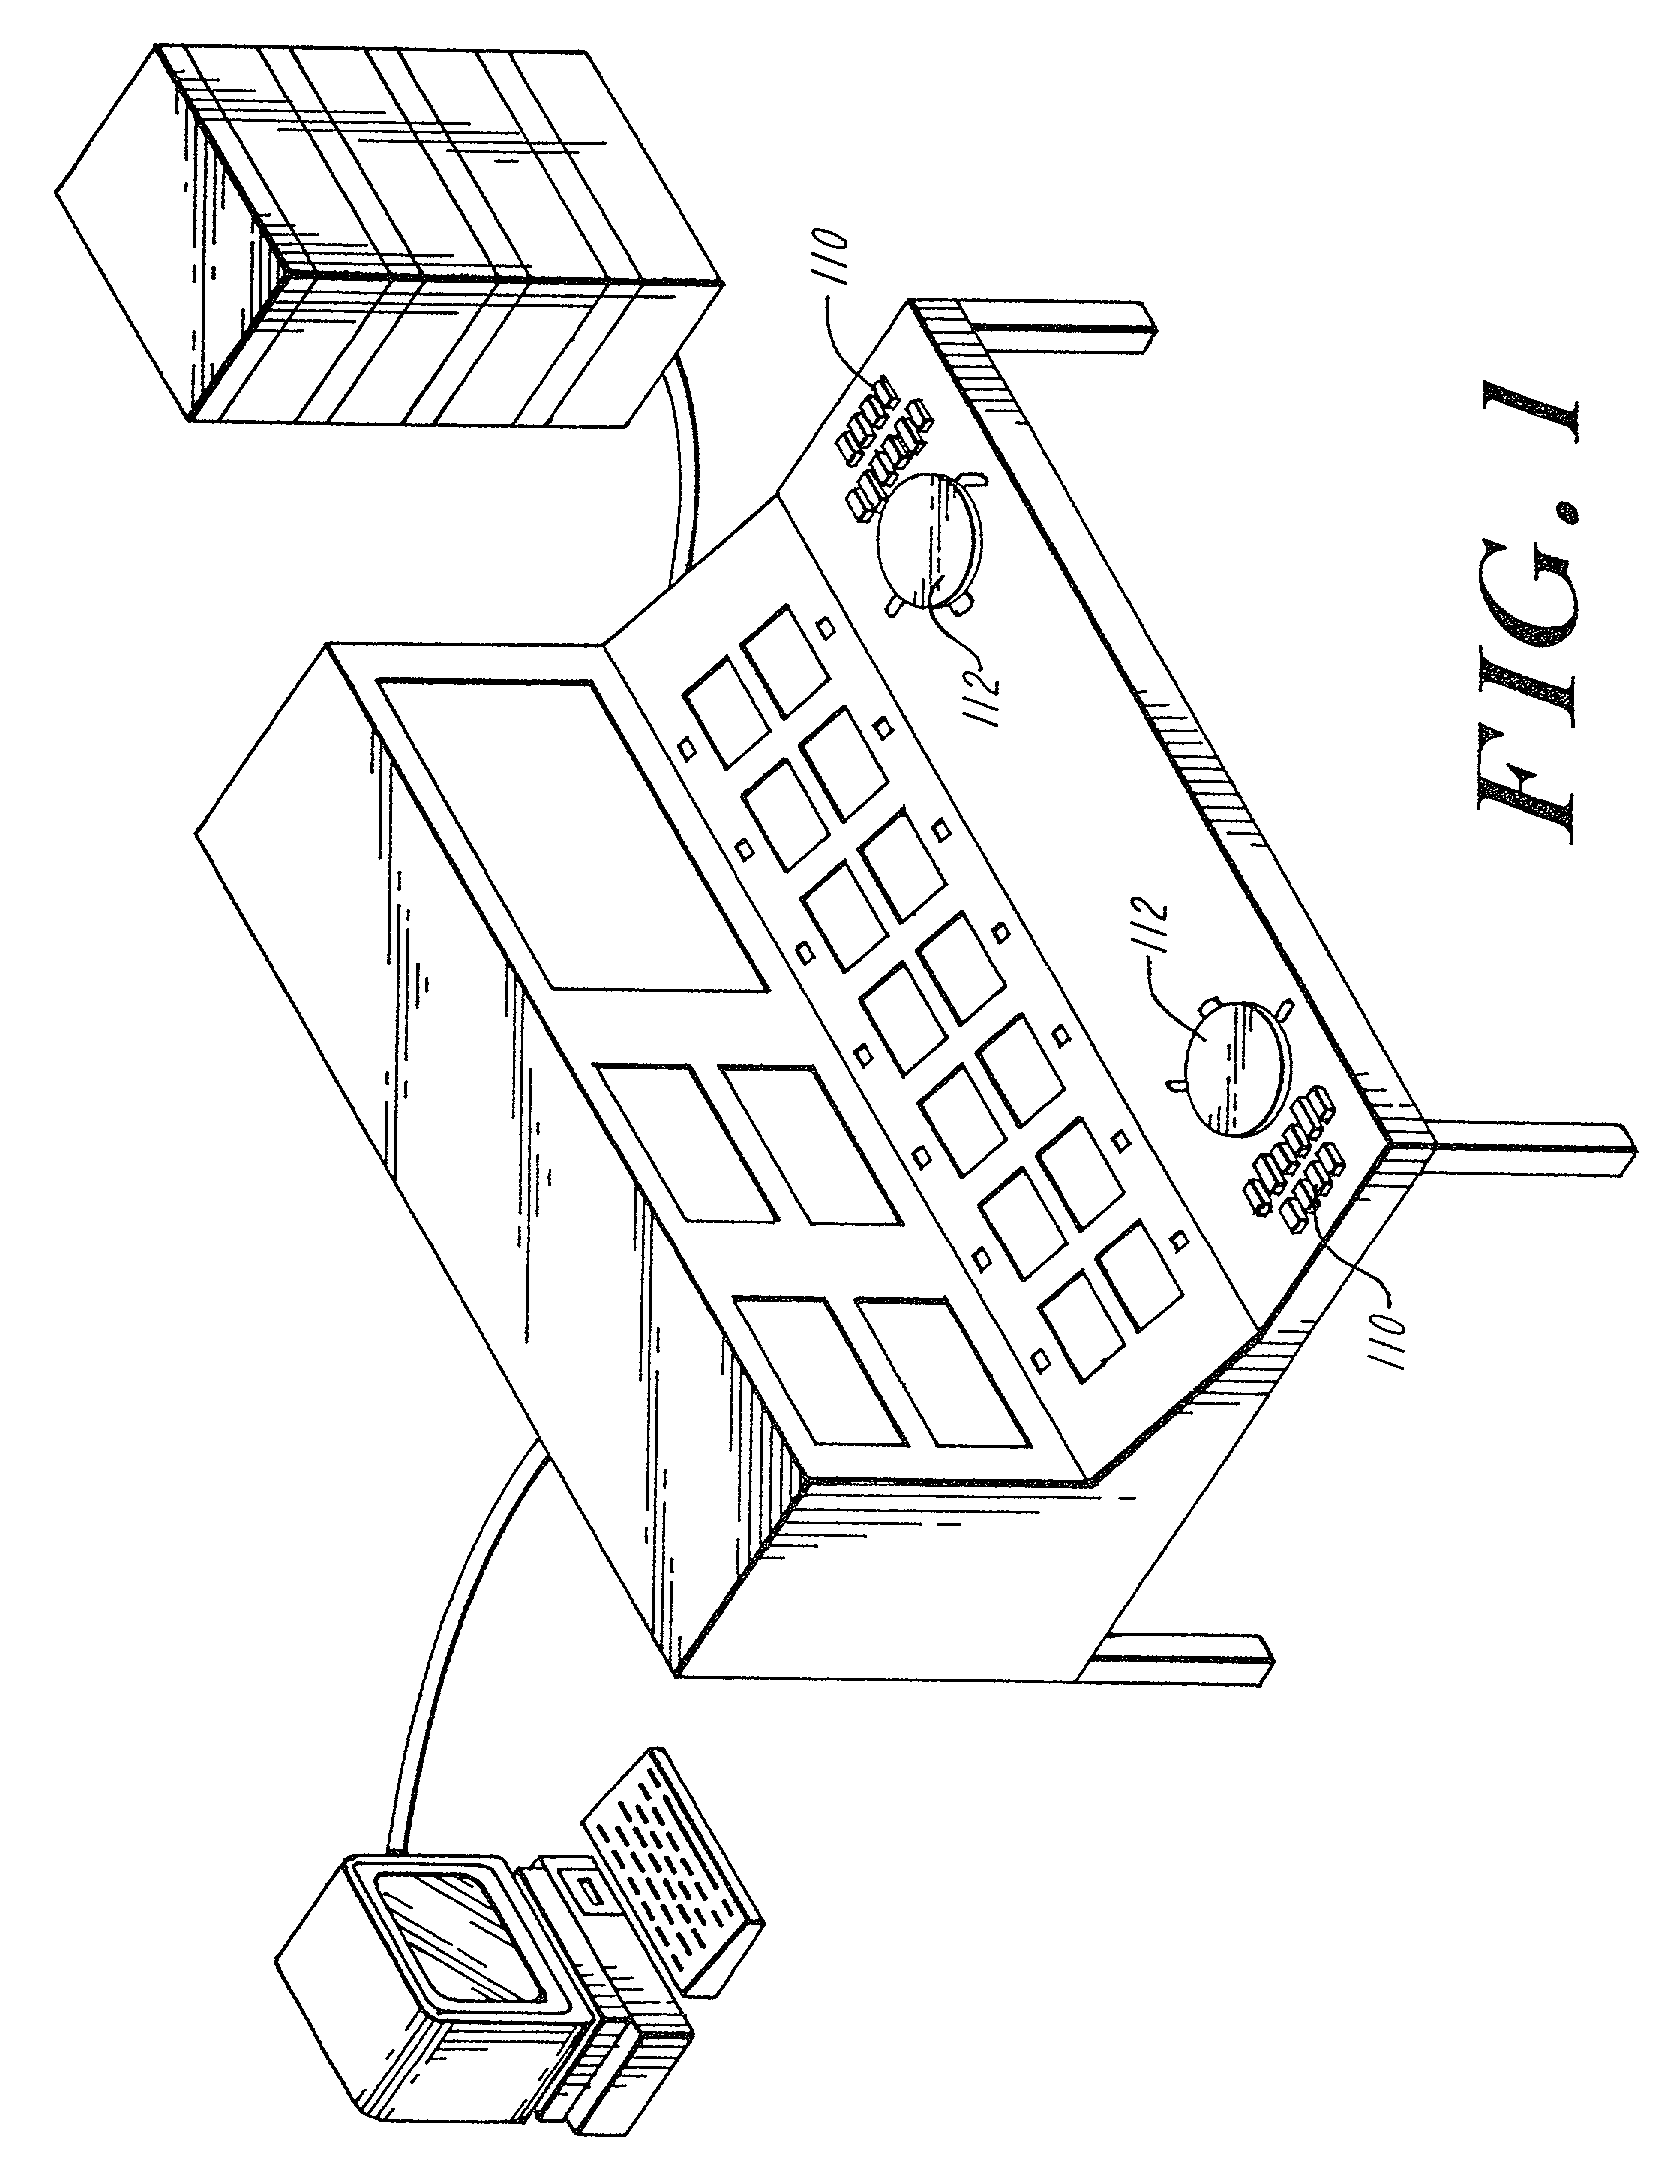 Interface device with tactile responsiveness